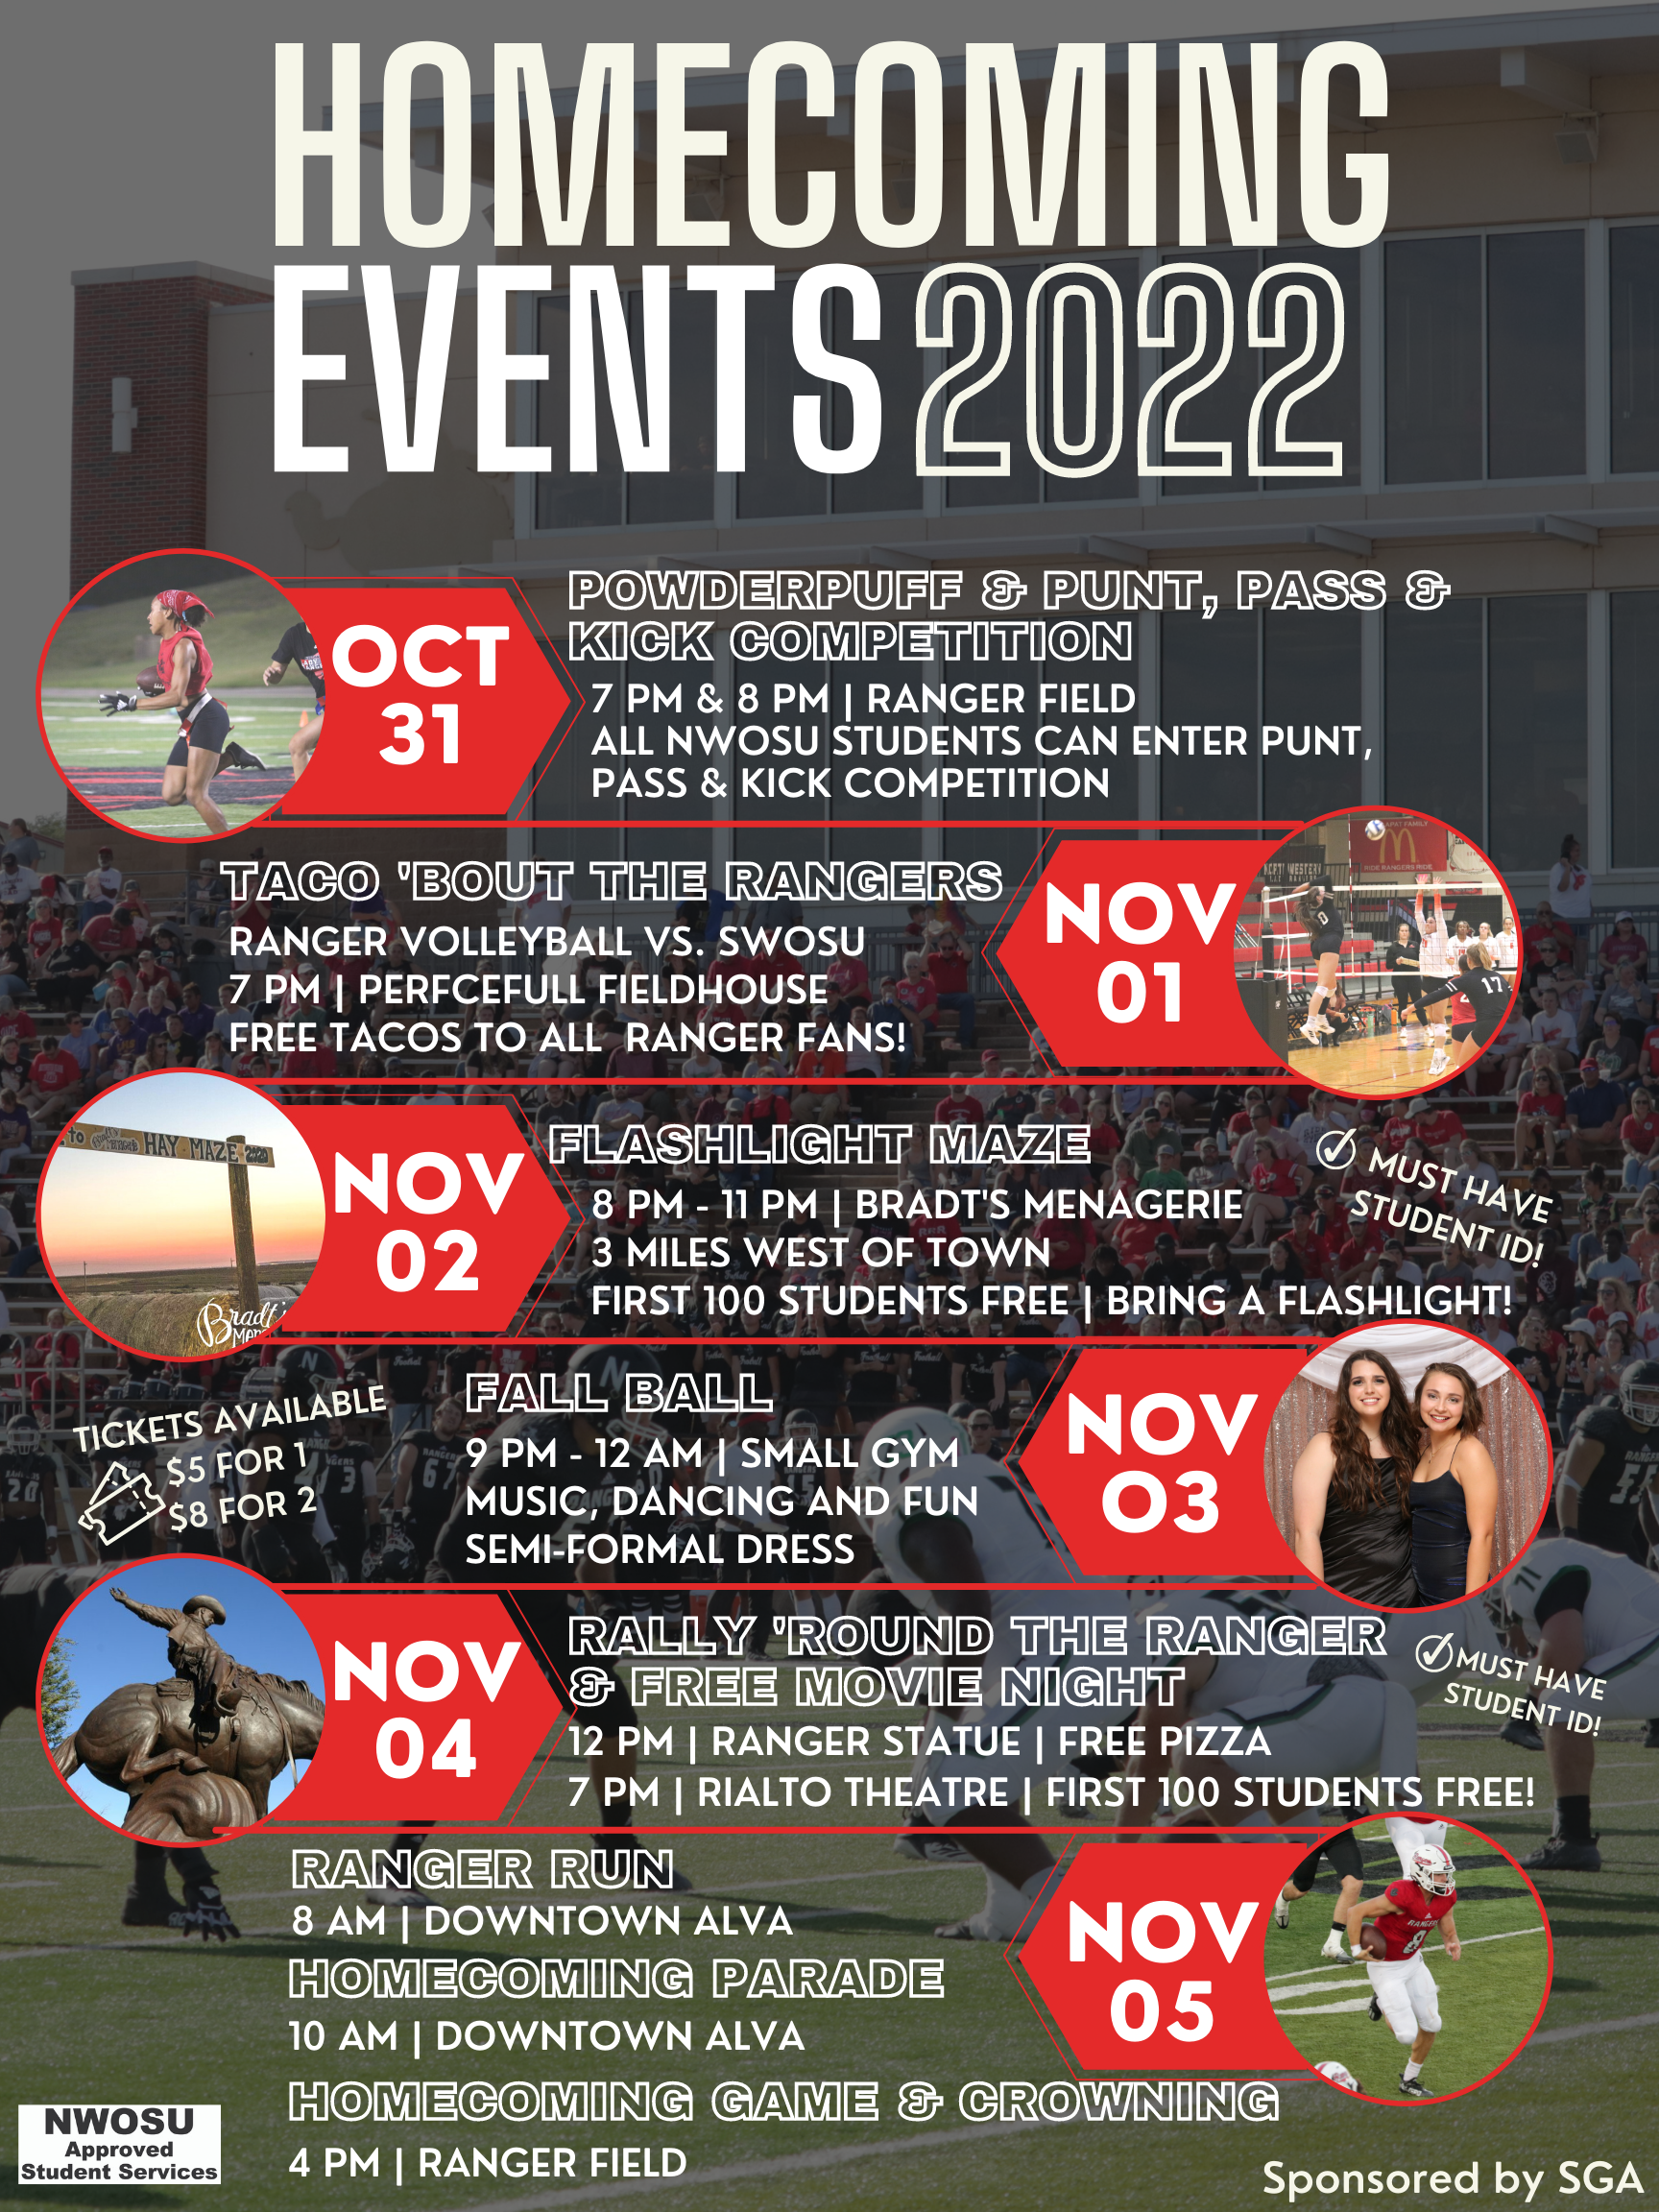 Homecoming 2022 Events